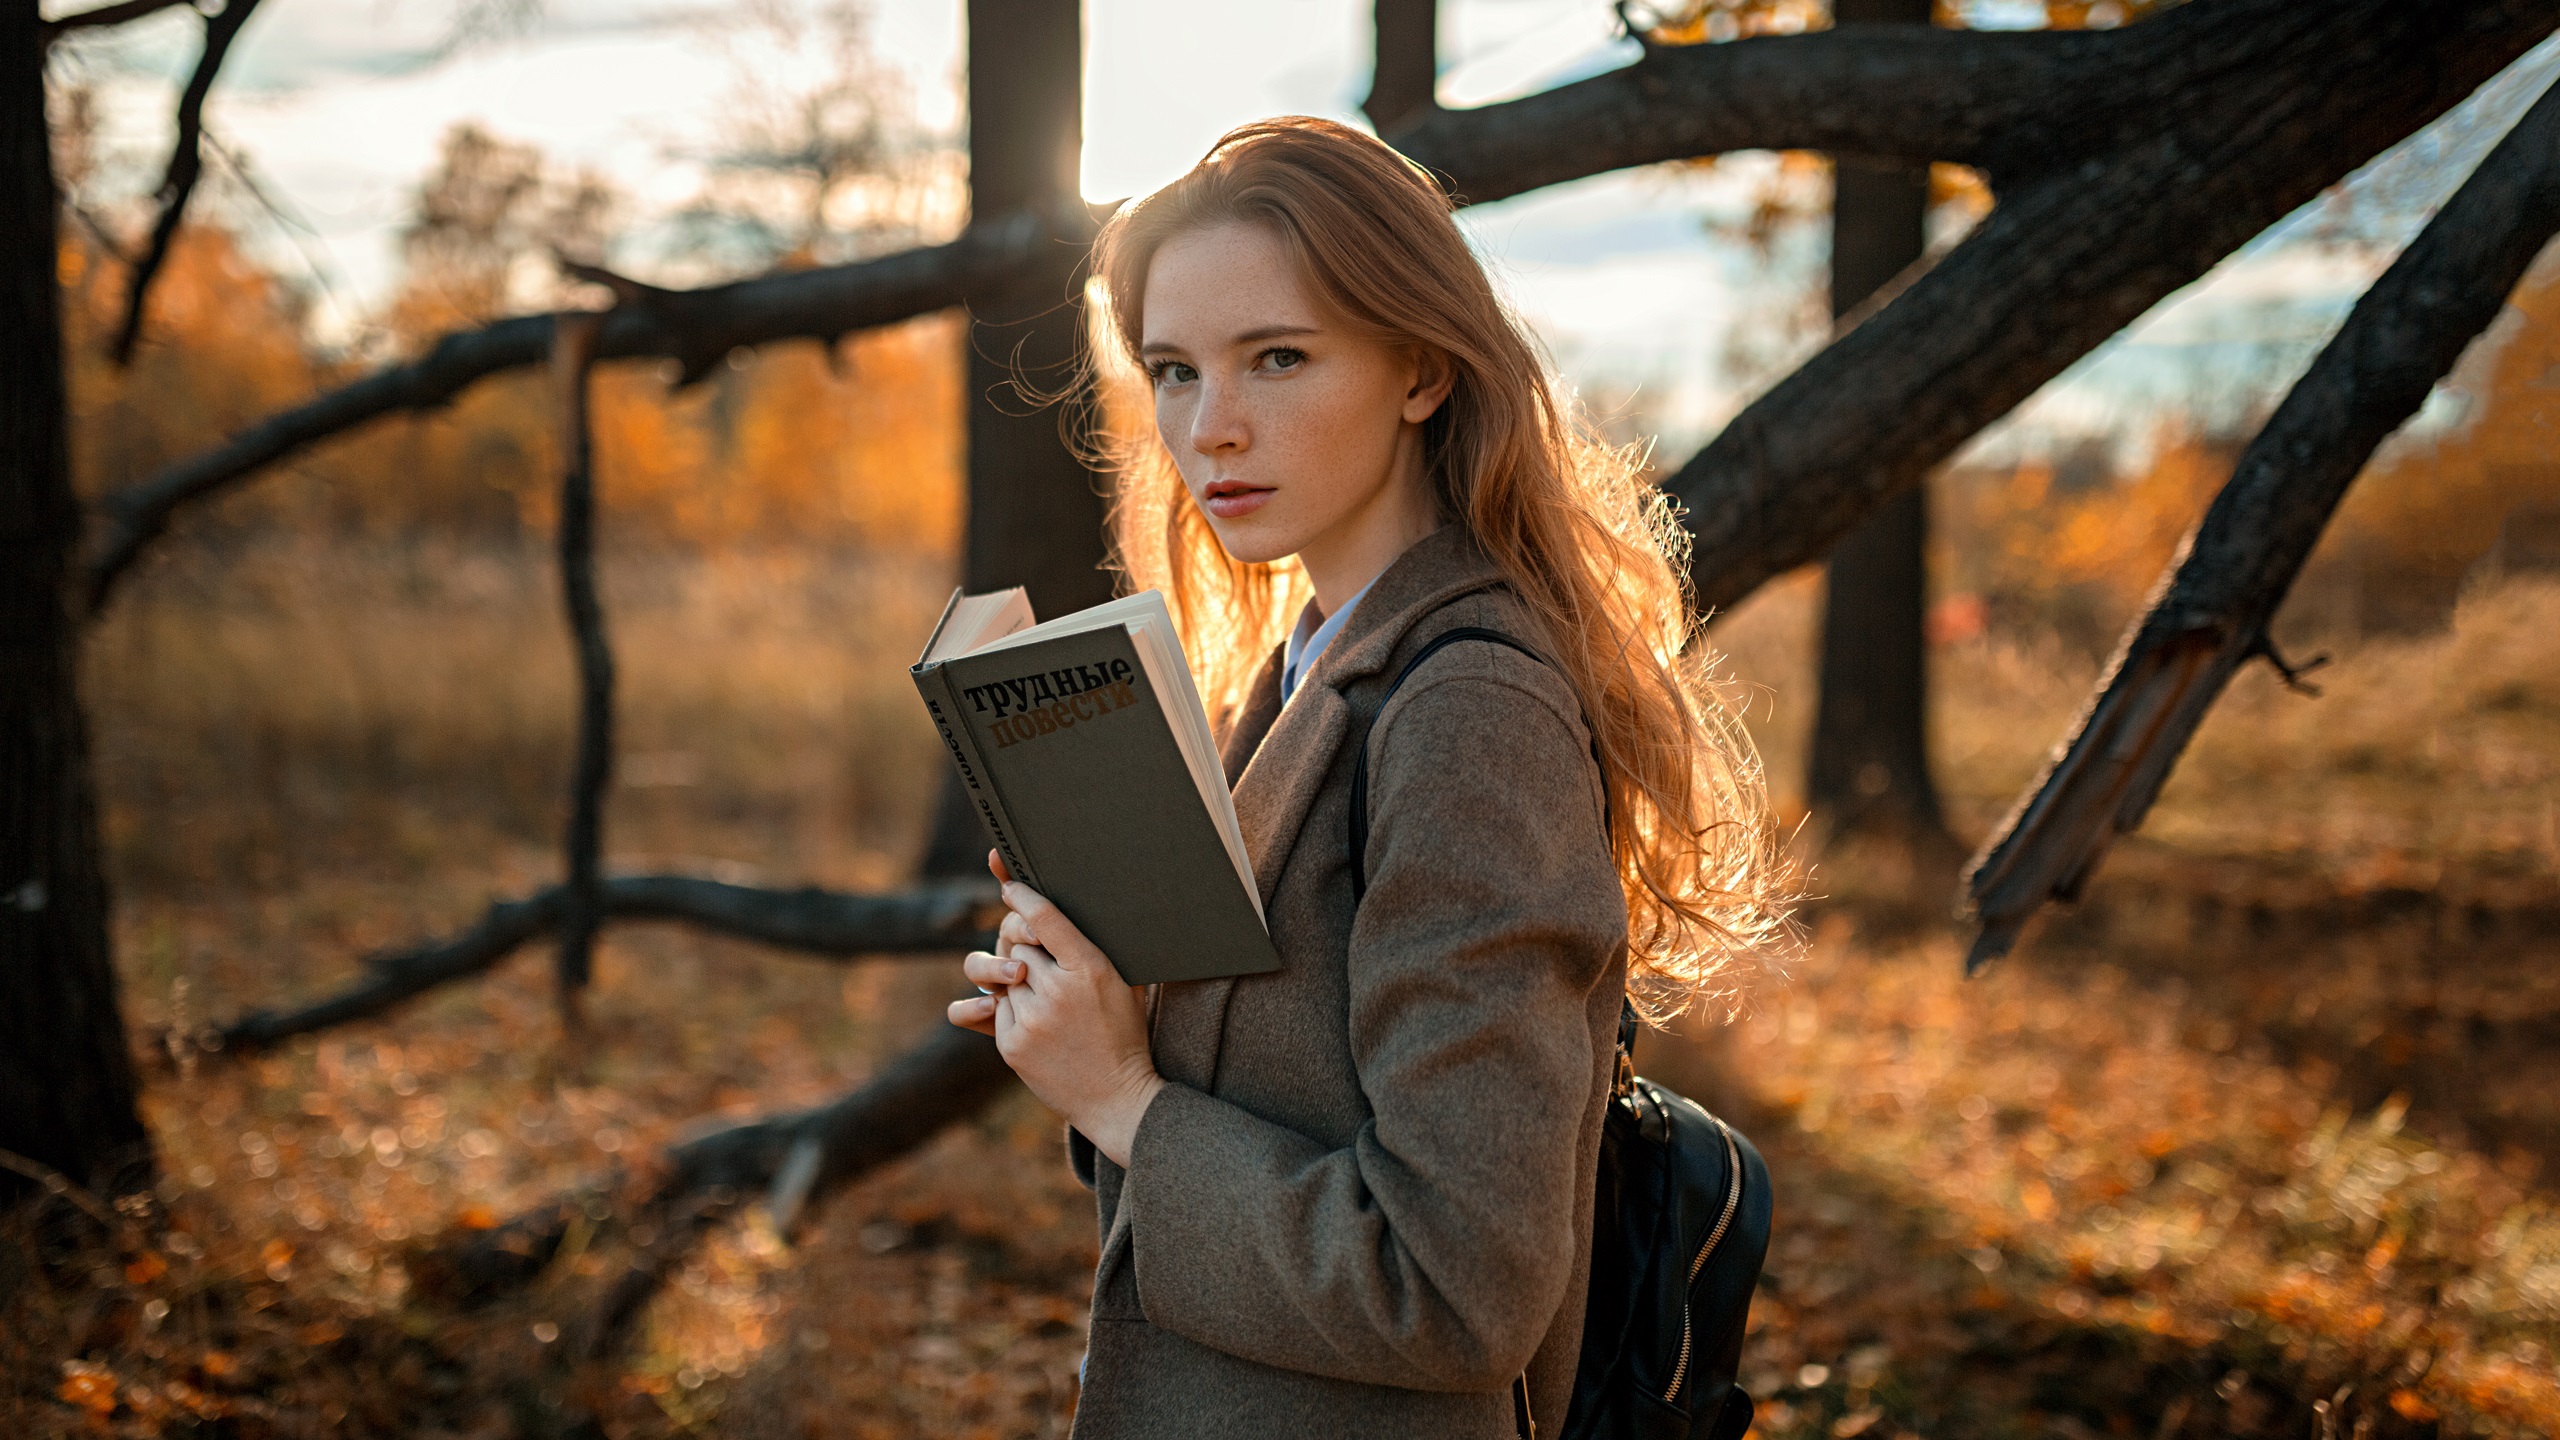 Women Model Redhead Long Hair Looking At Viewer Portrait Outdoors Freckles Coats Backpacks Books Sid 2560x1440